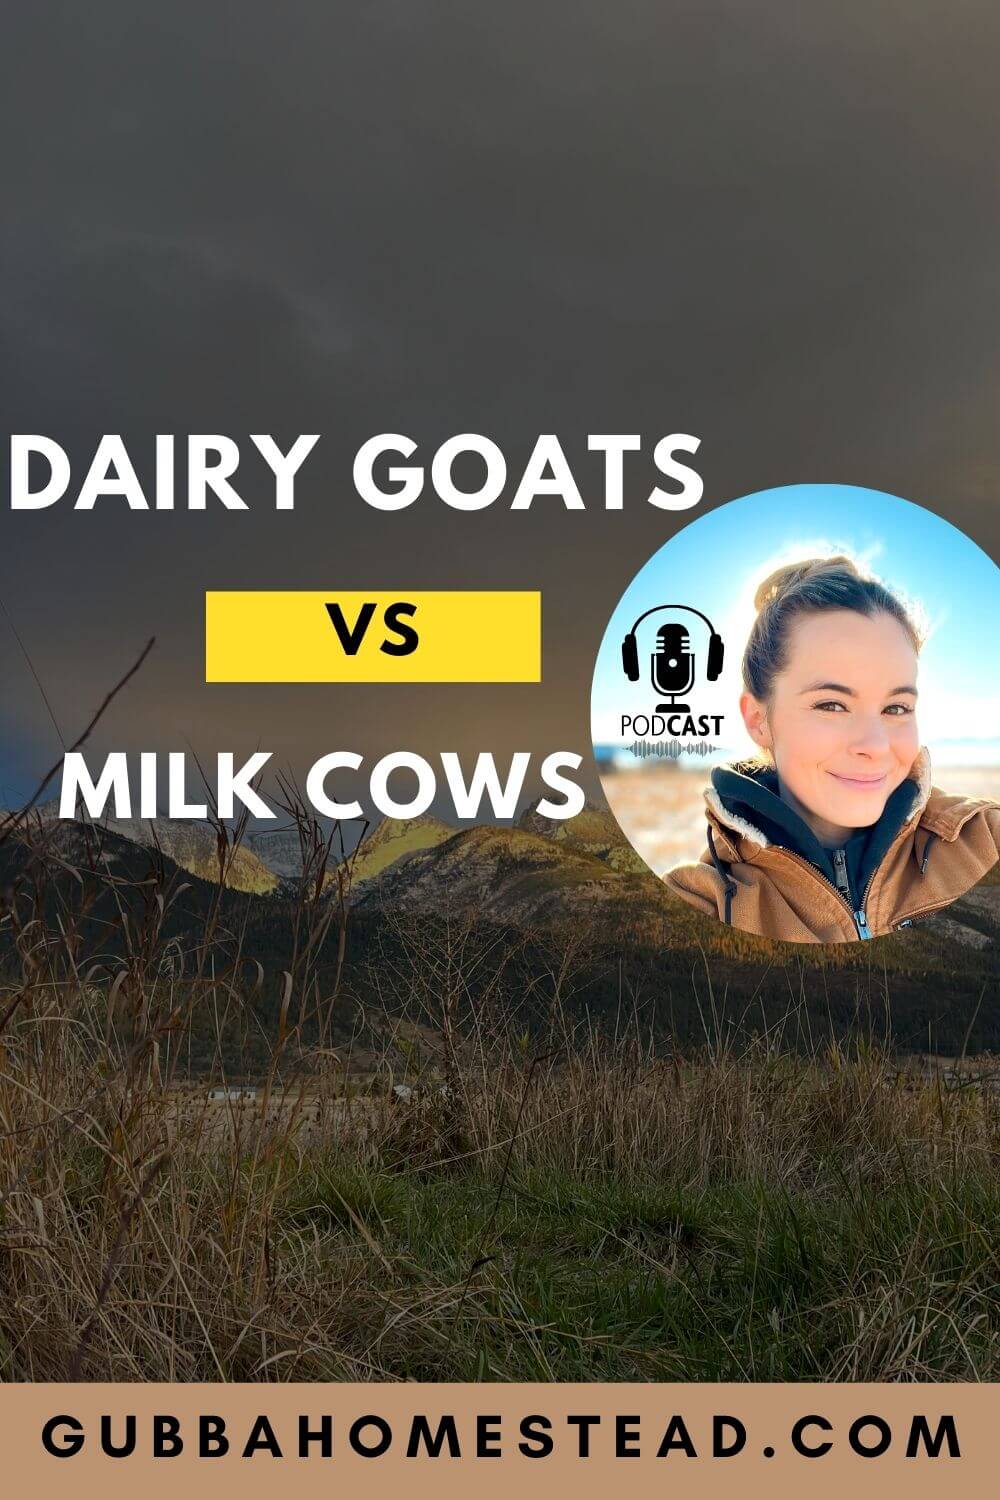 Dairy goats vs. Milk cows Which is Best?